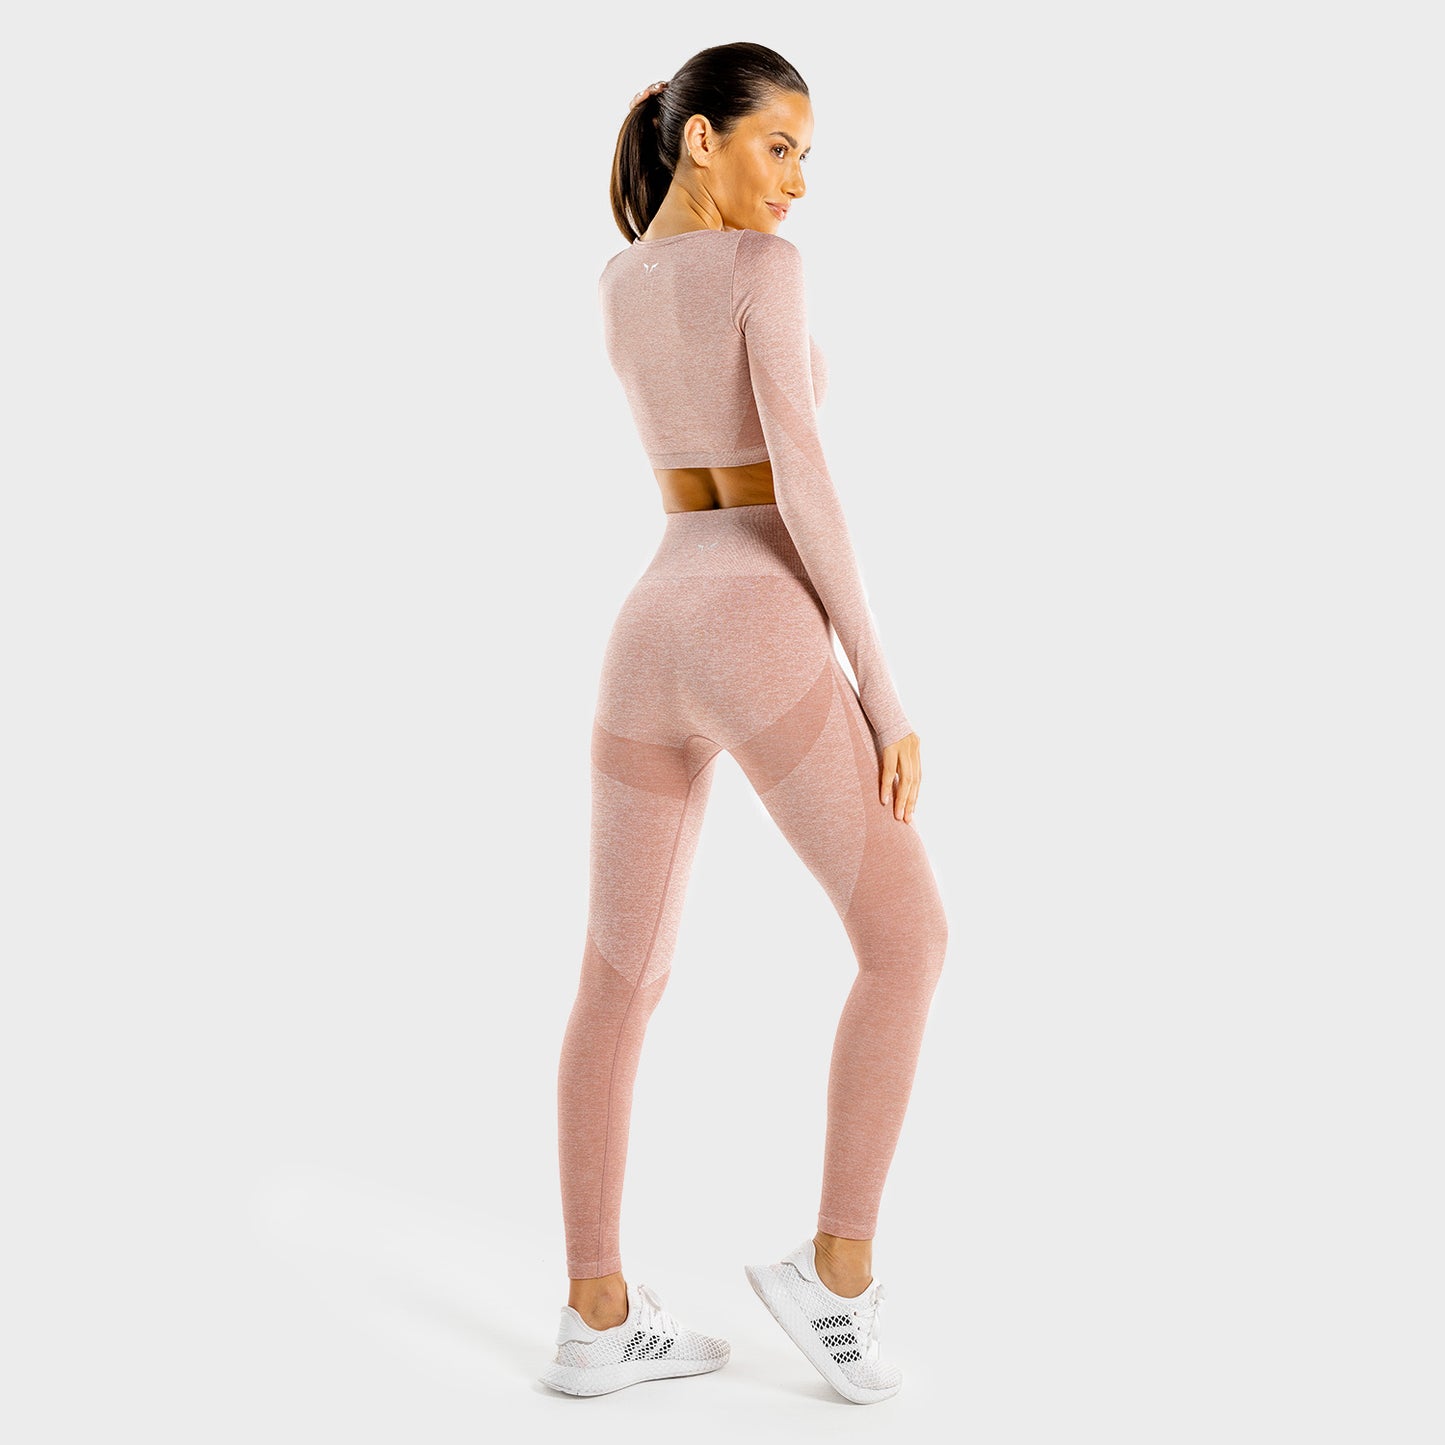 squatwolf-gym-leggings-for-women-marl-seamless-leggings-rose-gold-workout-clothes